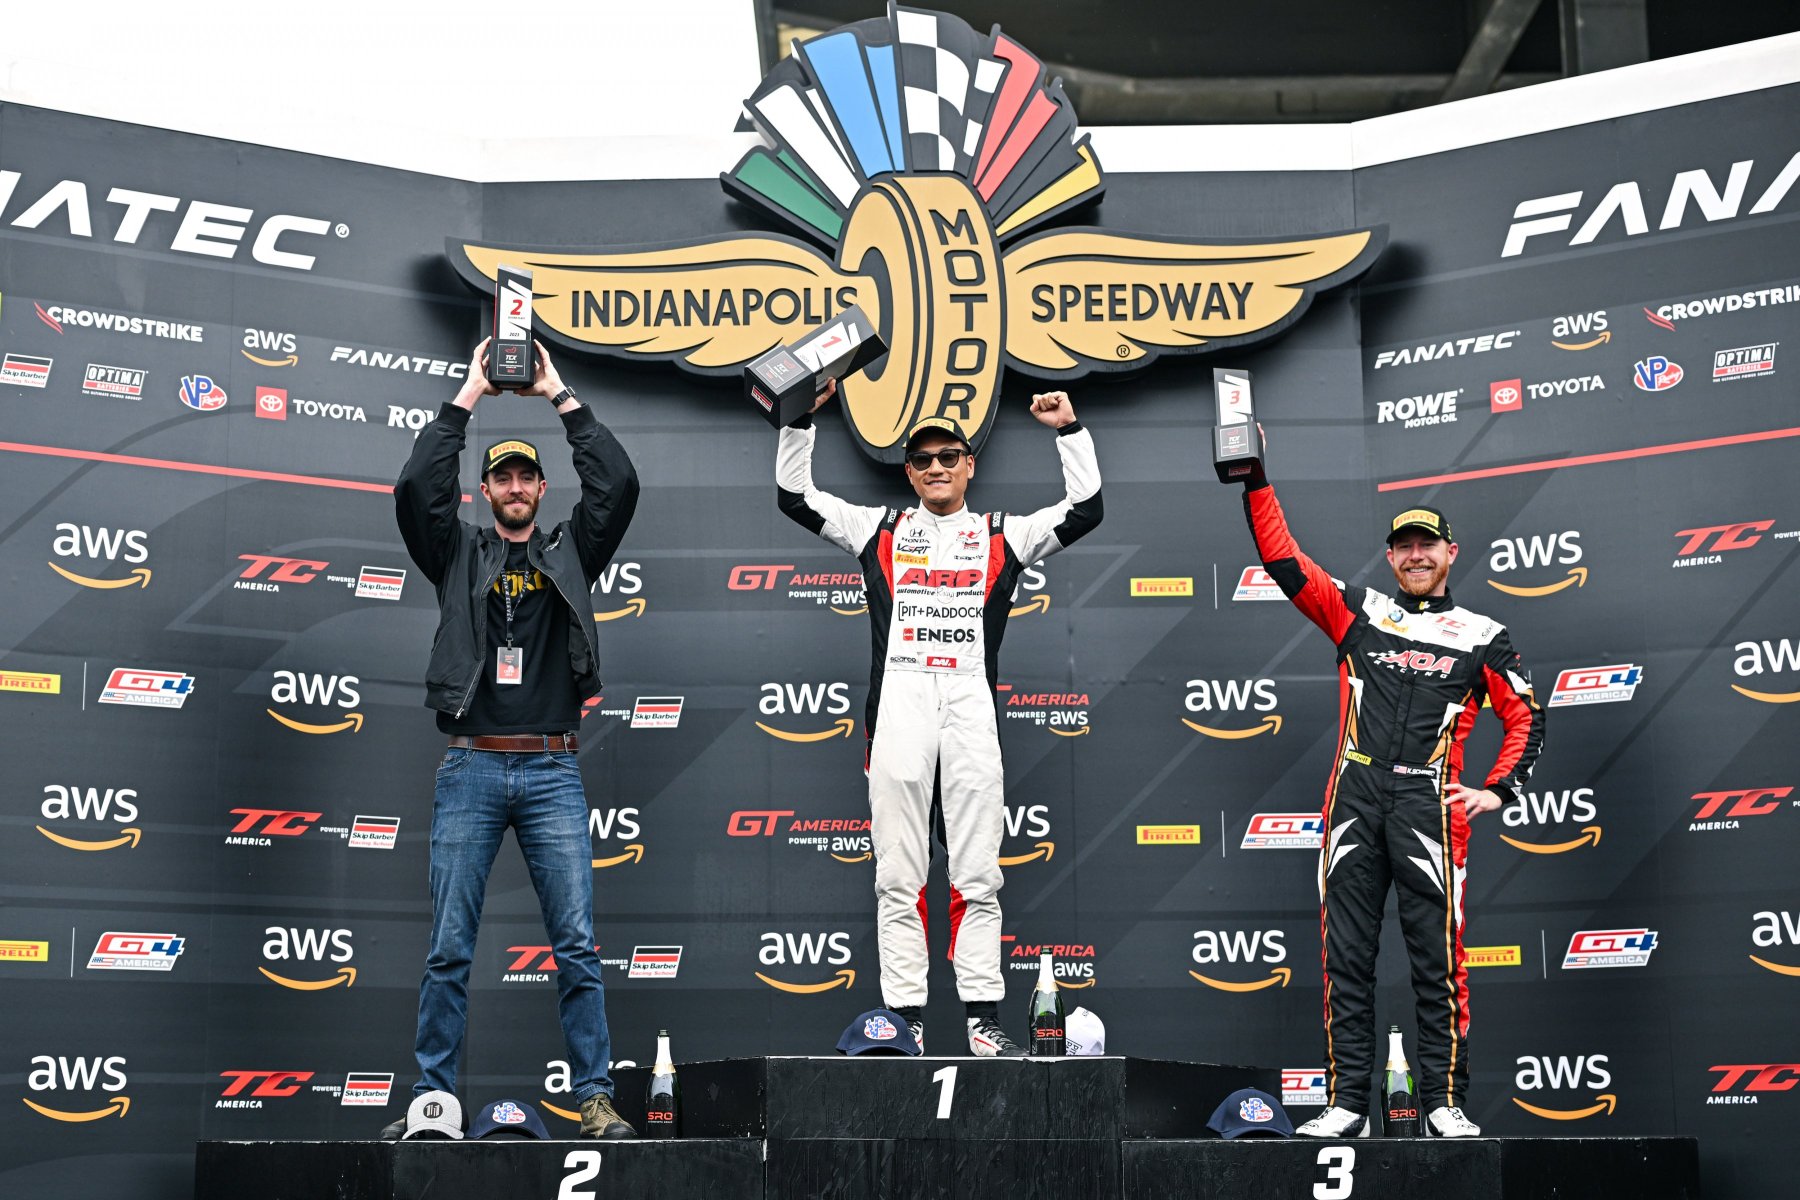 Podium at IMS in Final Round for Schmied